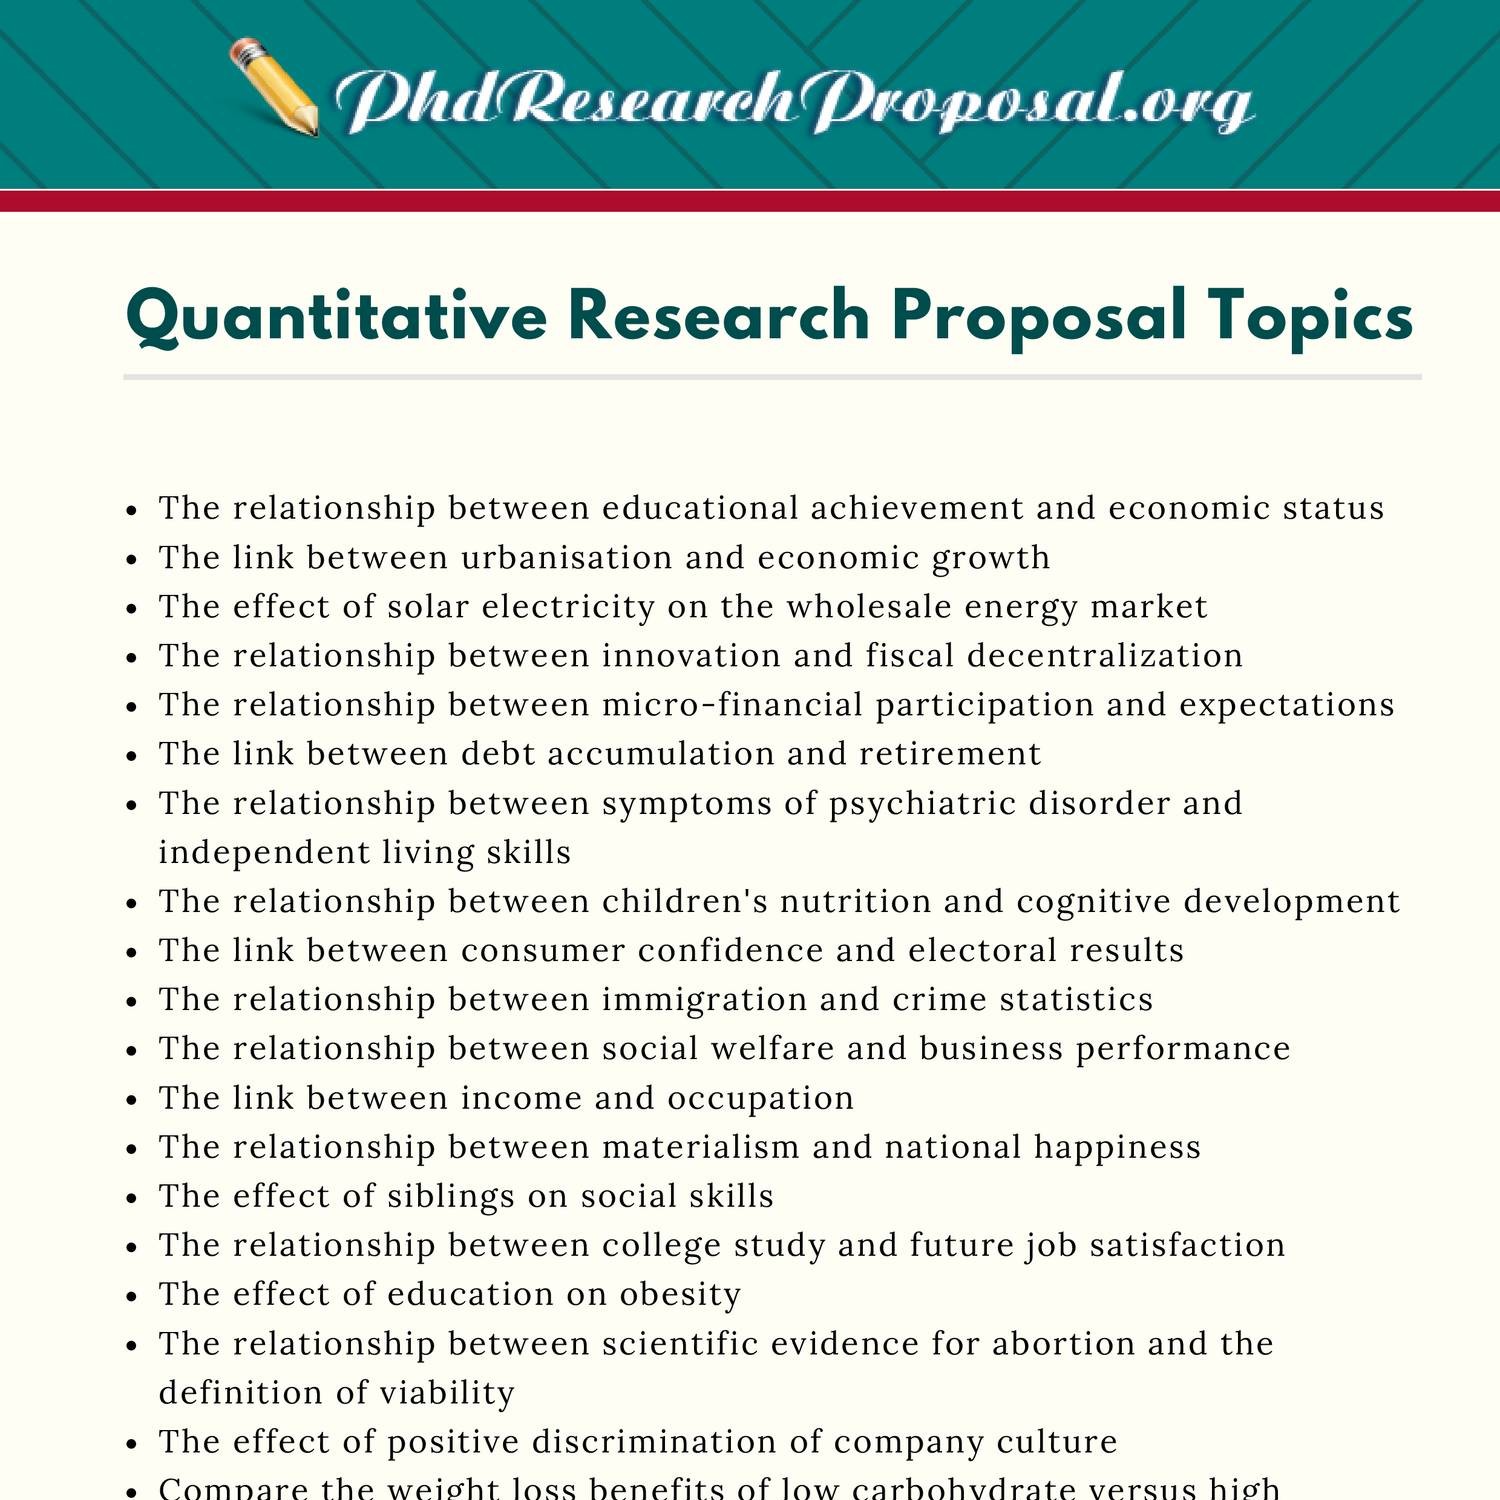 examples of quantitative research topics for humss students